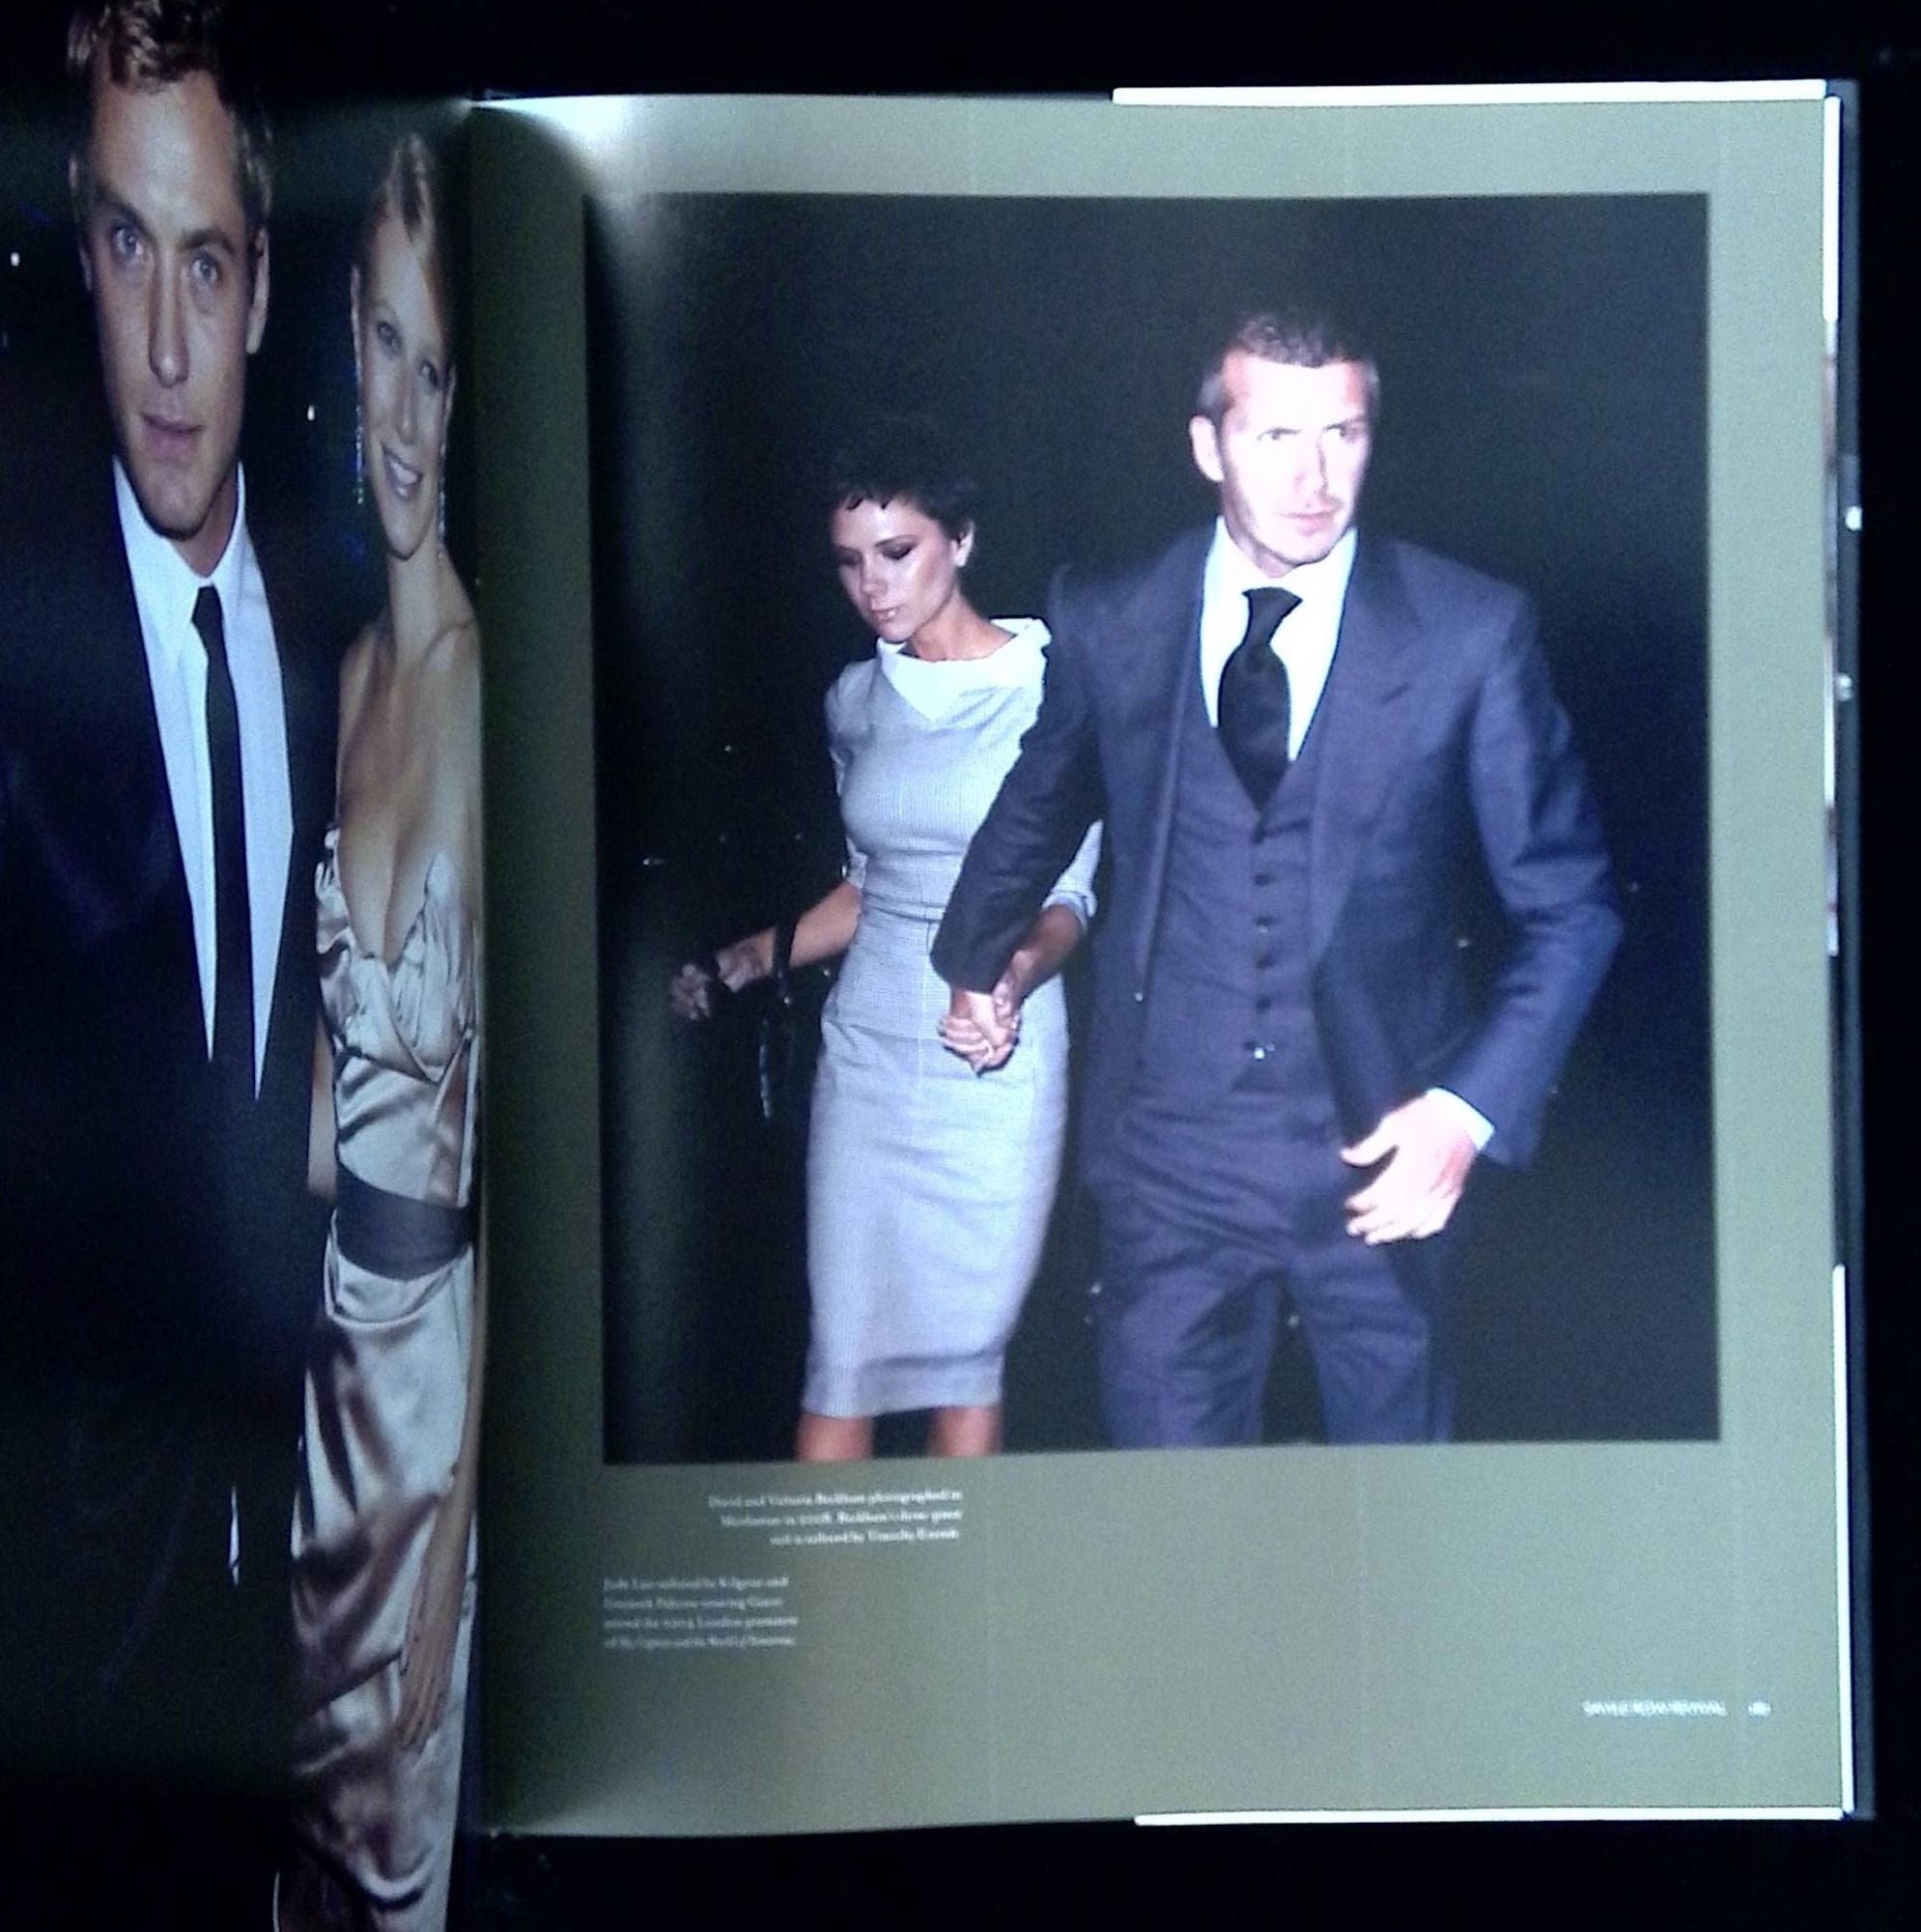 Bespoke: The Men's Style of Savile Row by James Sherwood, Guy Hills, Tom  Ford on Common Crow Books